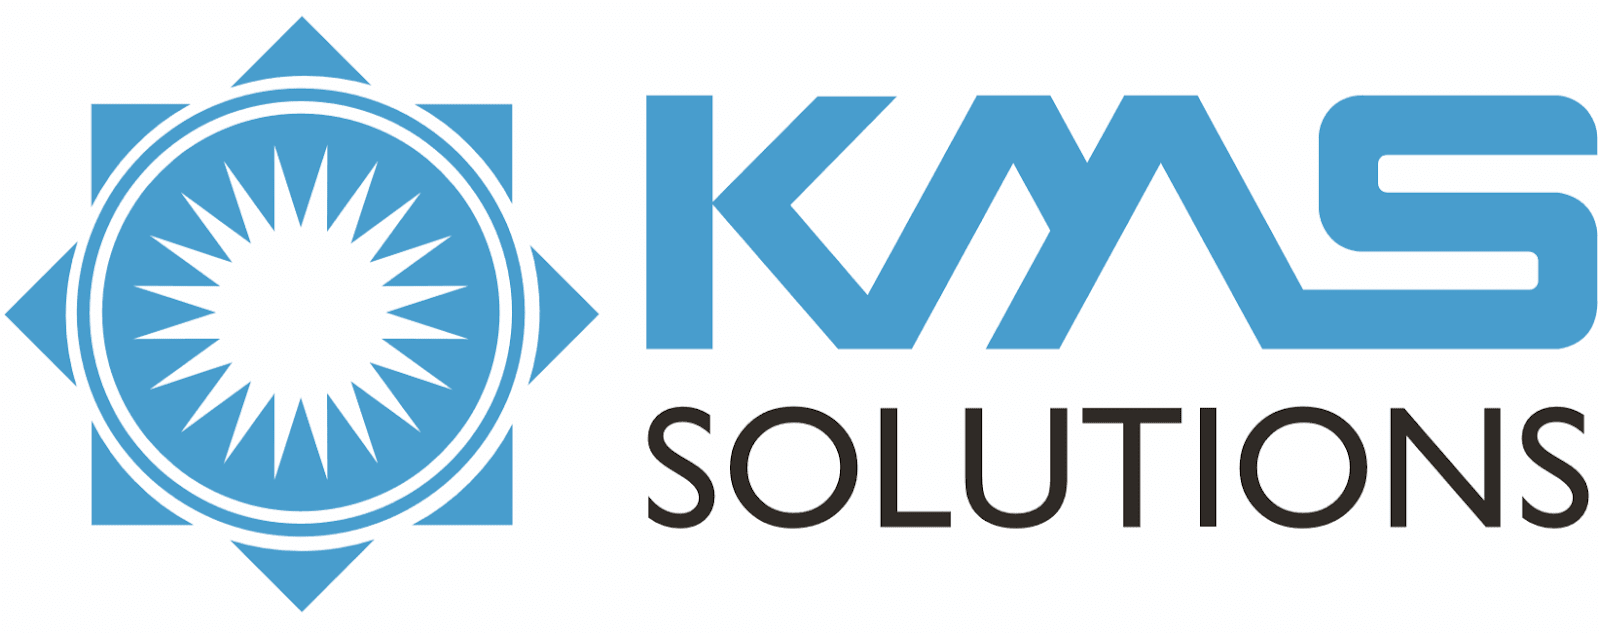 TOP 5 RELIABLE EKYC SOFTWARE FOR BANKS AND FINANCIAL INSTITUTION